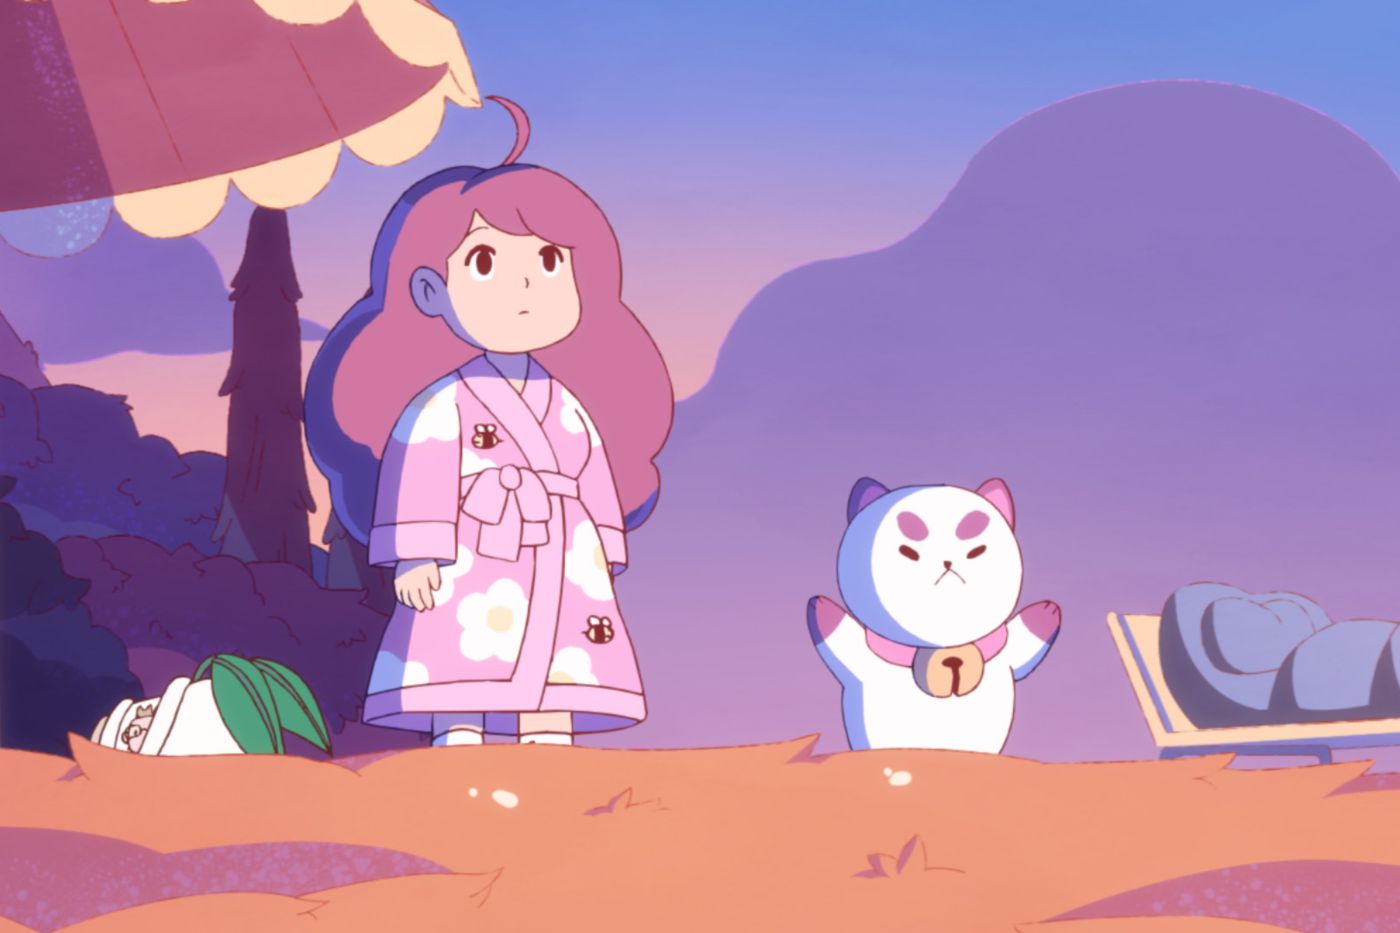 Bee and Puppycat Wallpaper